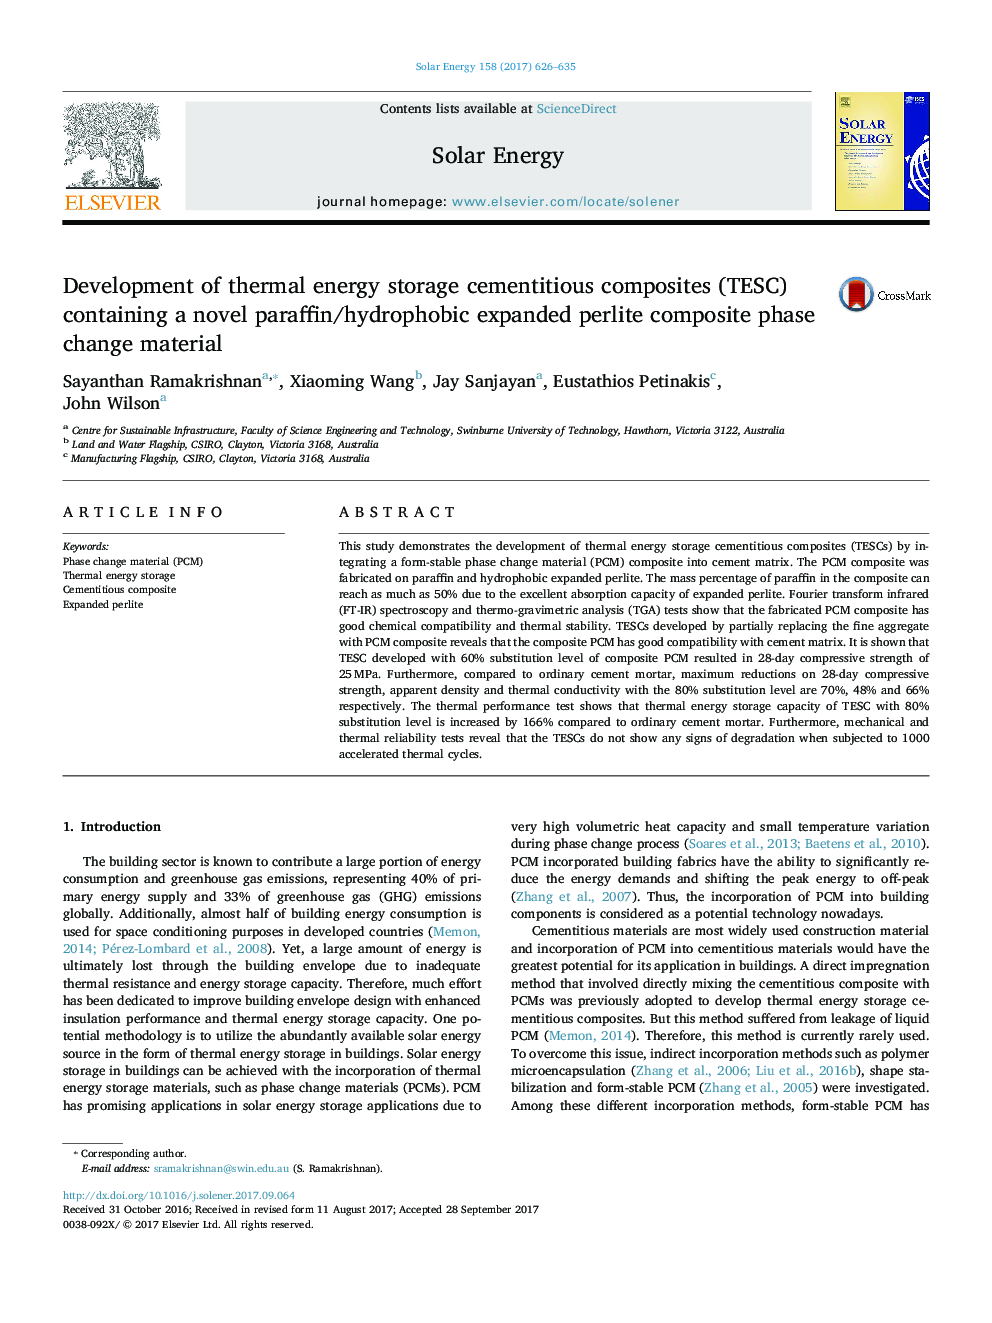 Development of thermal energy storage cementitious composites (TESC) containing a novel paraffin/hydrophobic expanded perlite composite phase change material